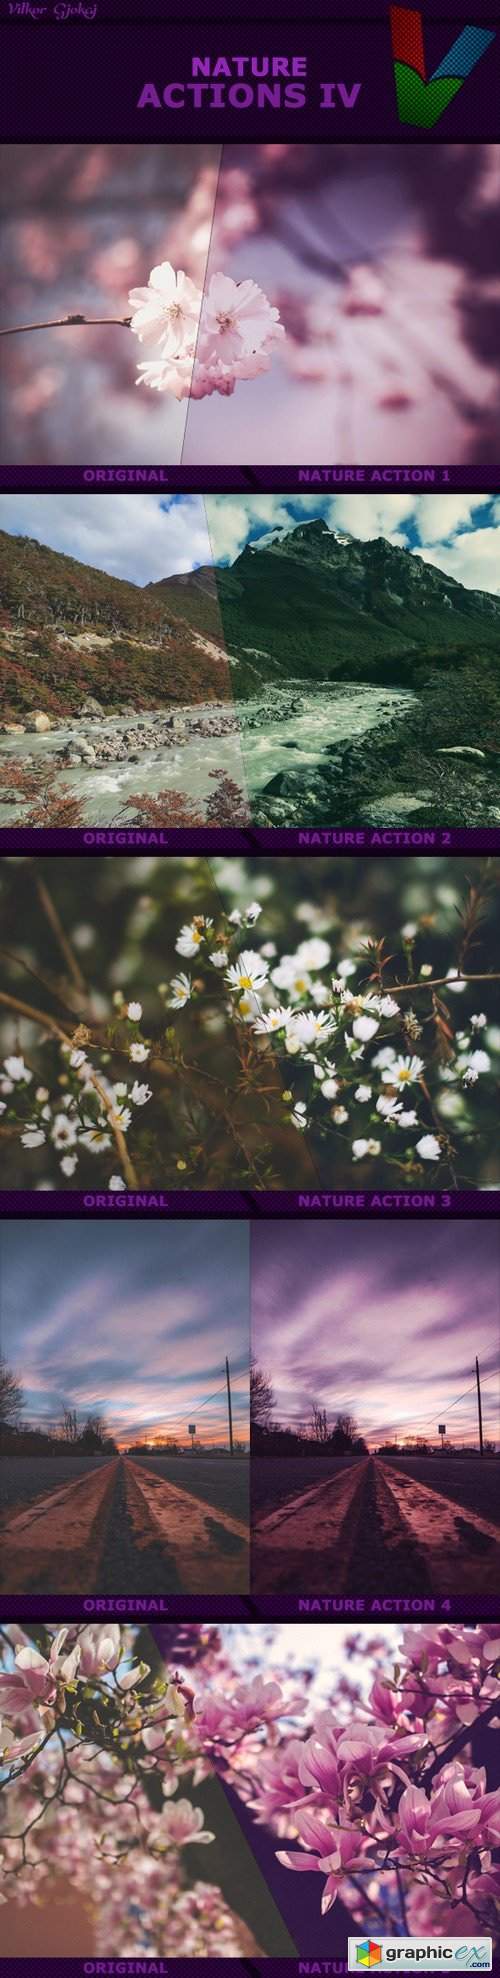 Nature Actions IV